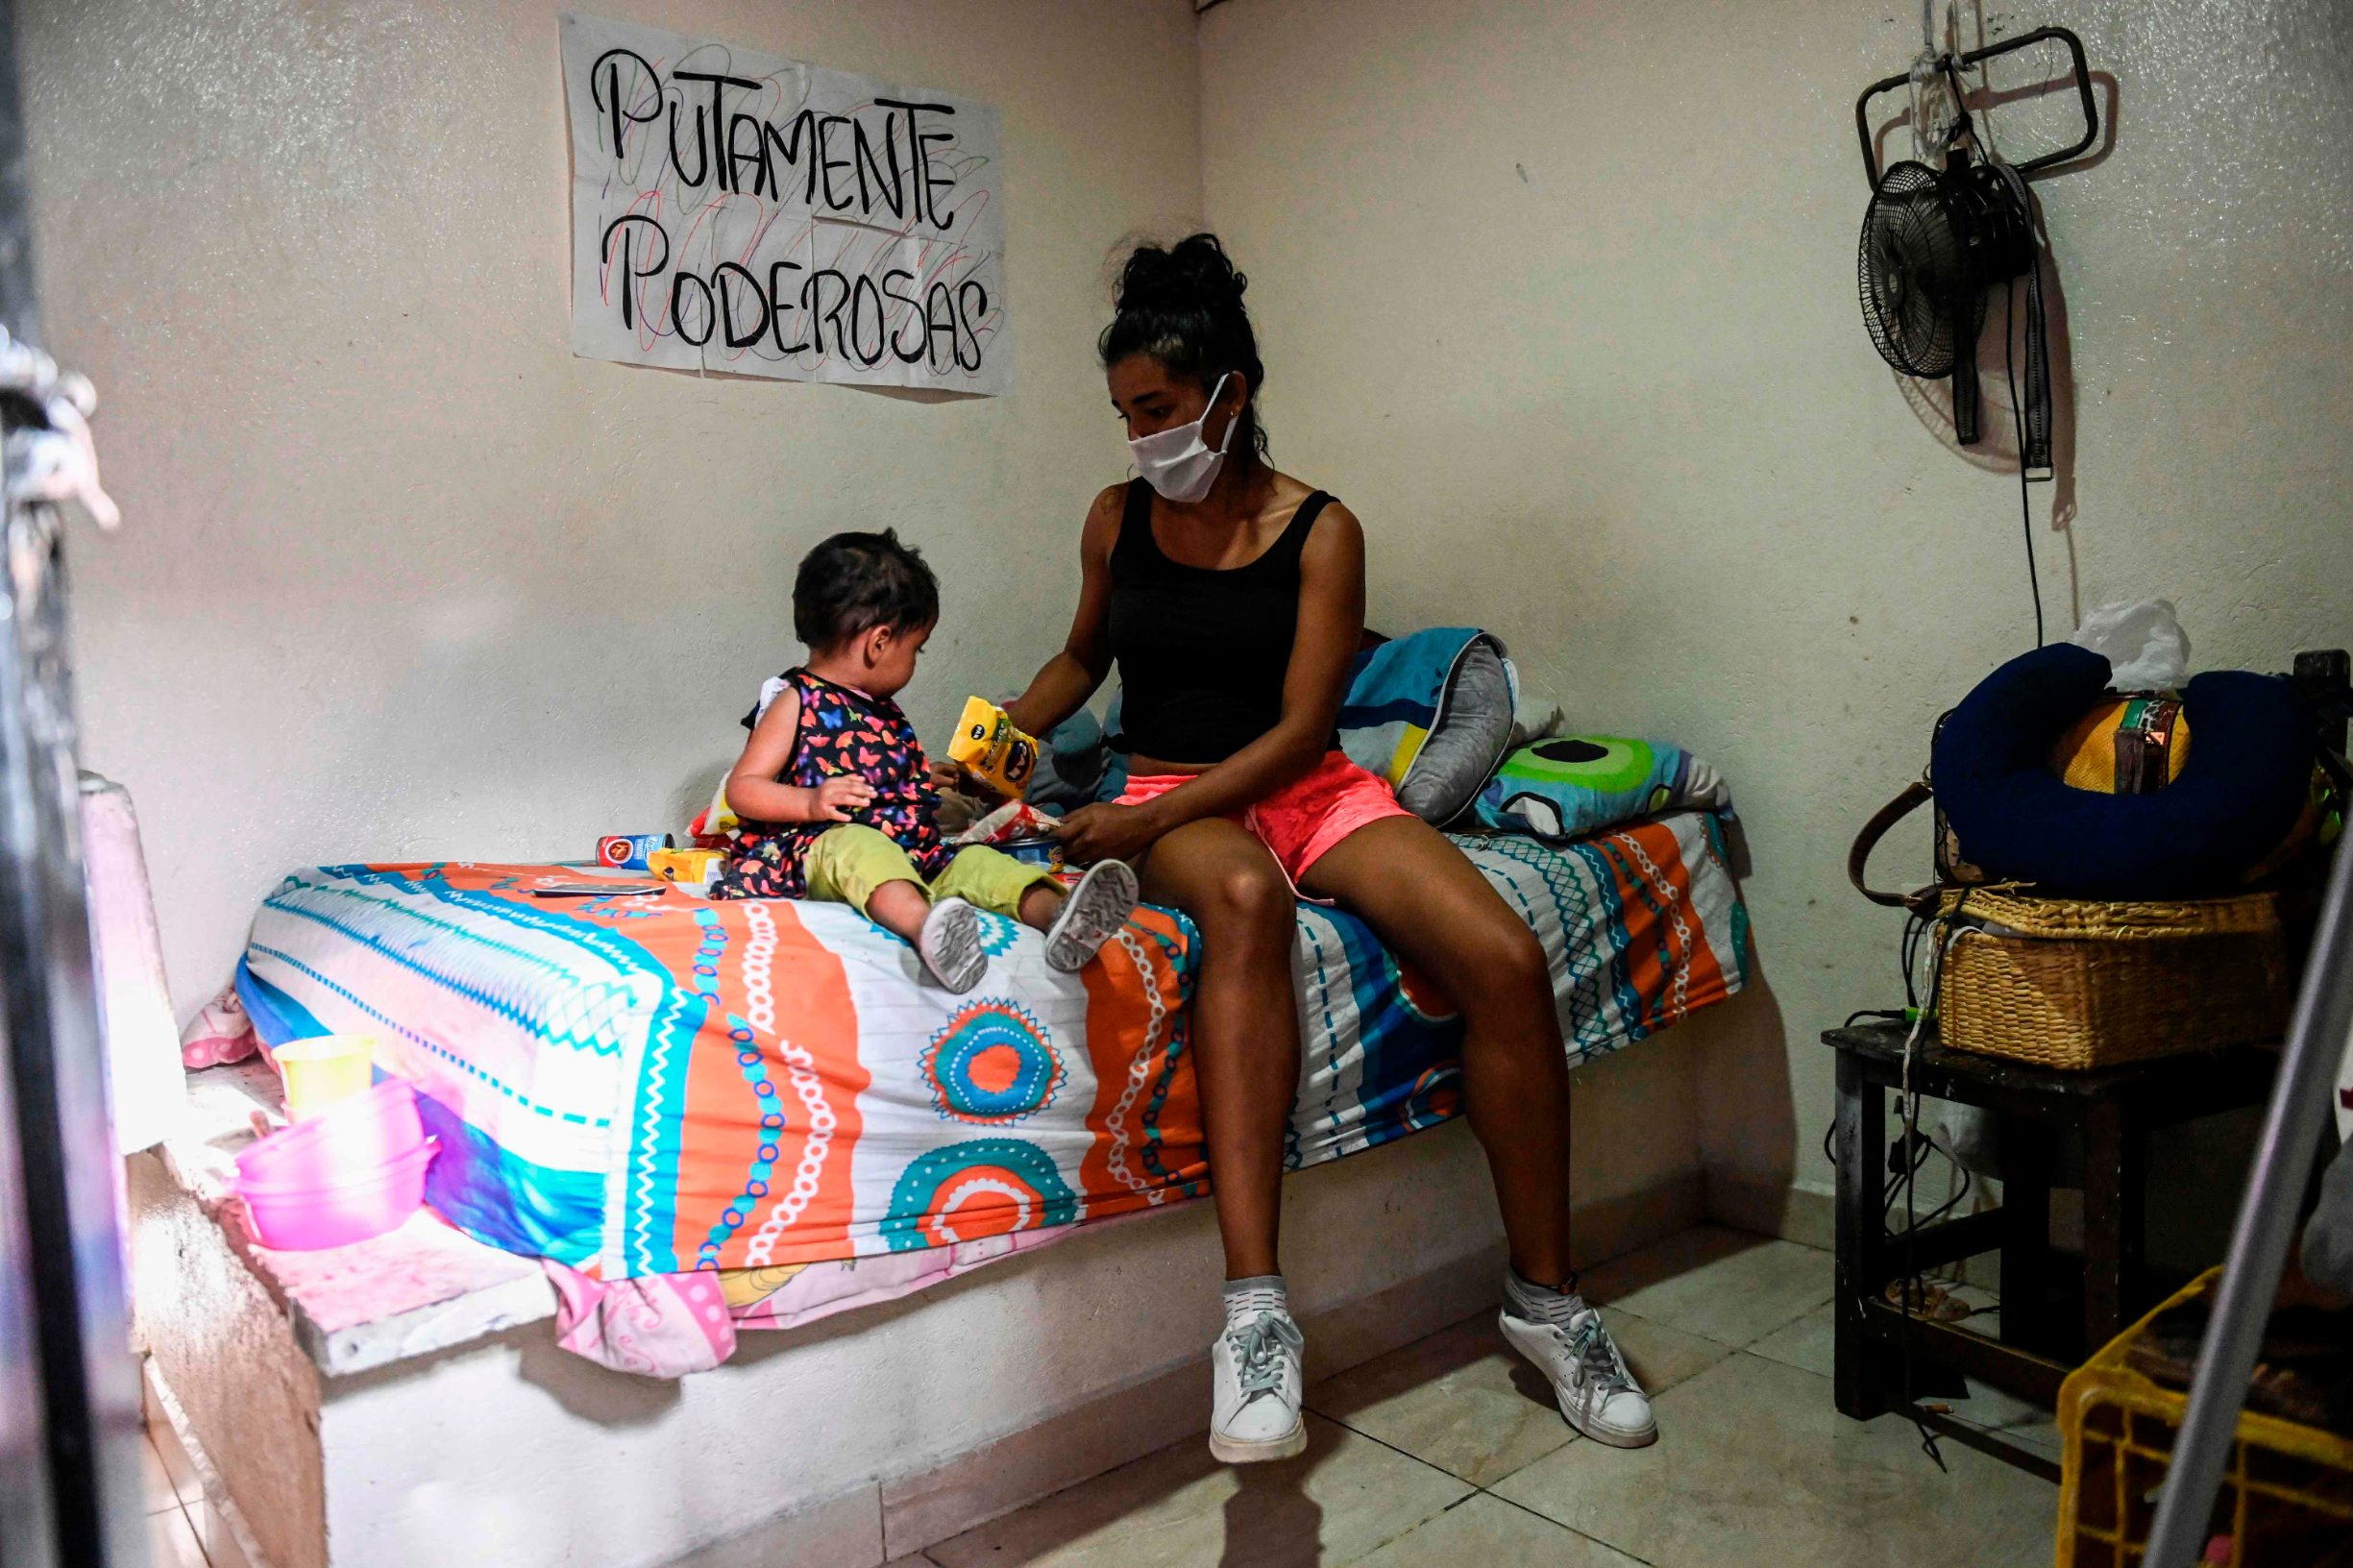 TOPSHOT - A sex worker and her daughter are pictured as they organize groceries received by activists, in her bedroom at low cost hotel located in the Tolerance zone known as the Raudal Sector, where sex workers live and work in Medellin, Colombia, on April 6, 2020. (Photo by Joaquin SARMIENTO / AFP)